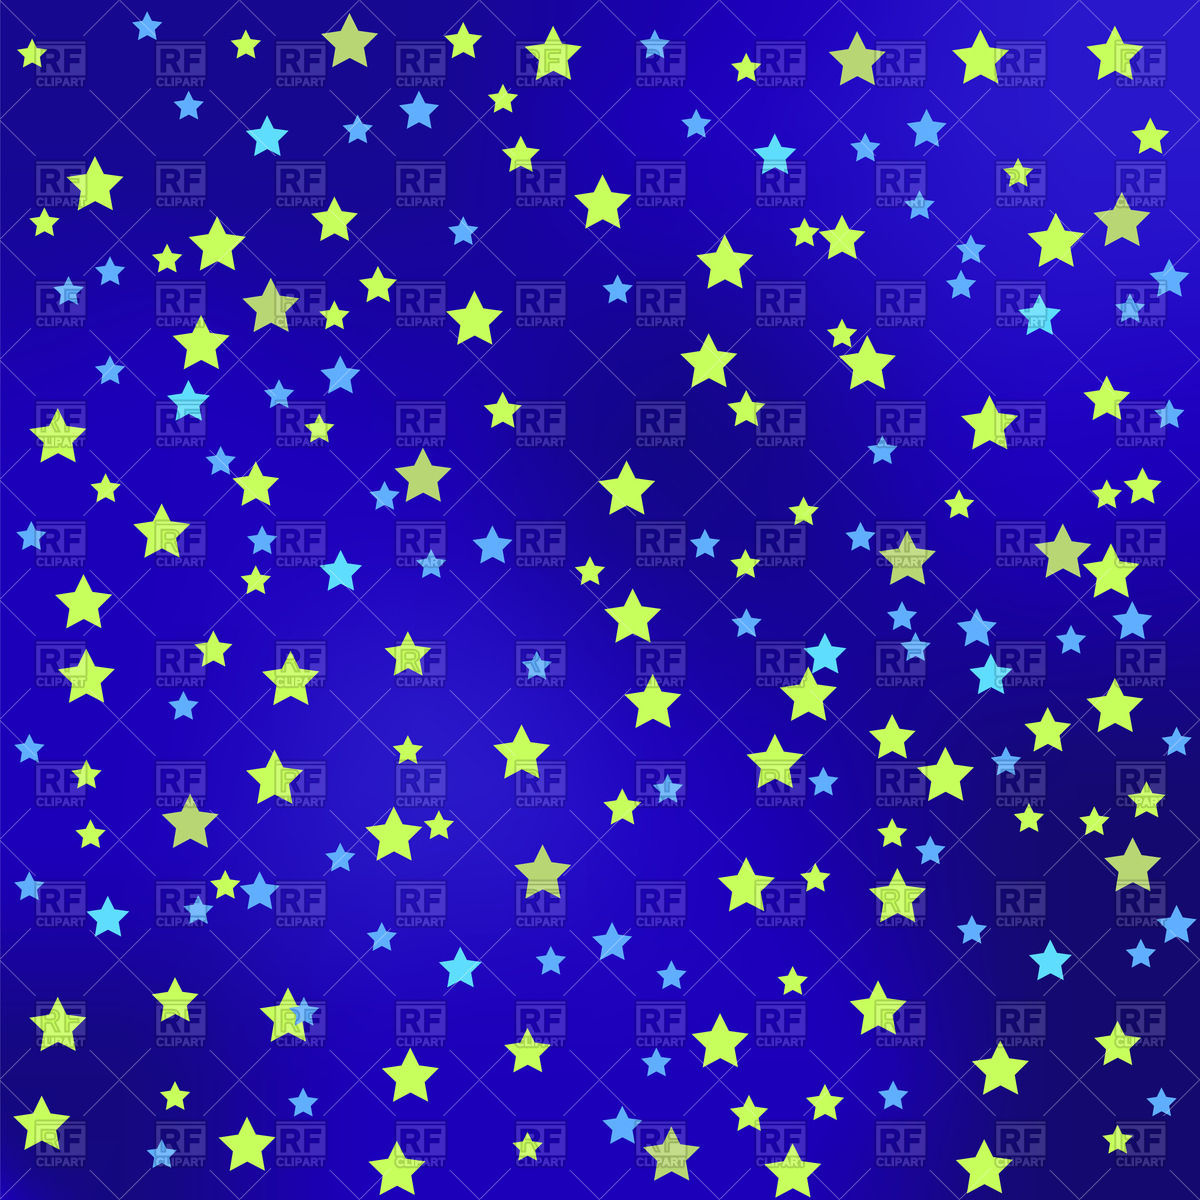 starry night clipart images - photo #8